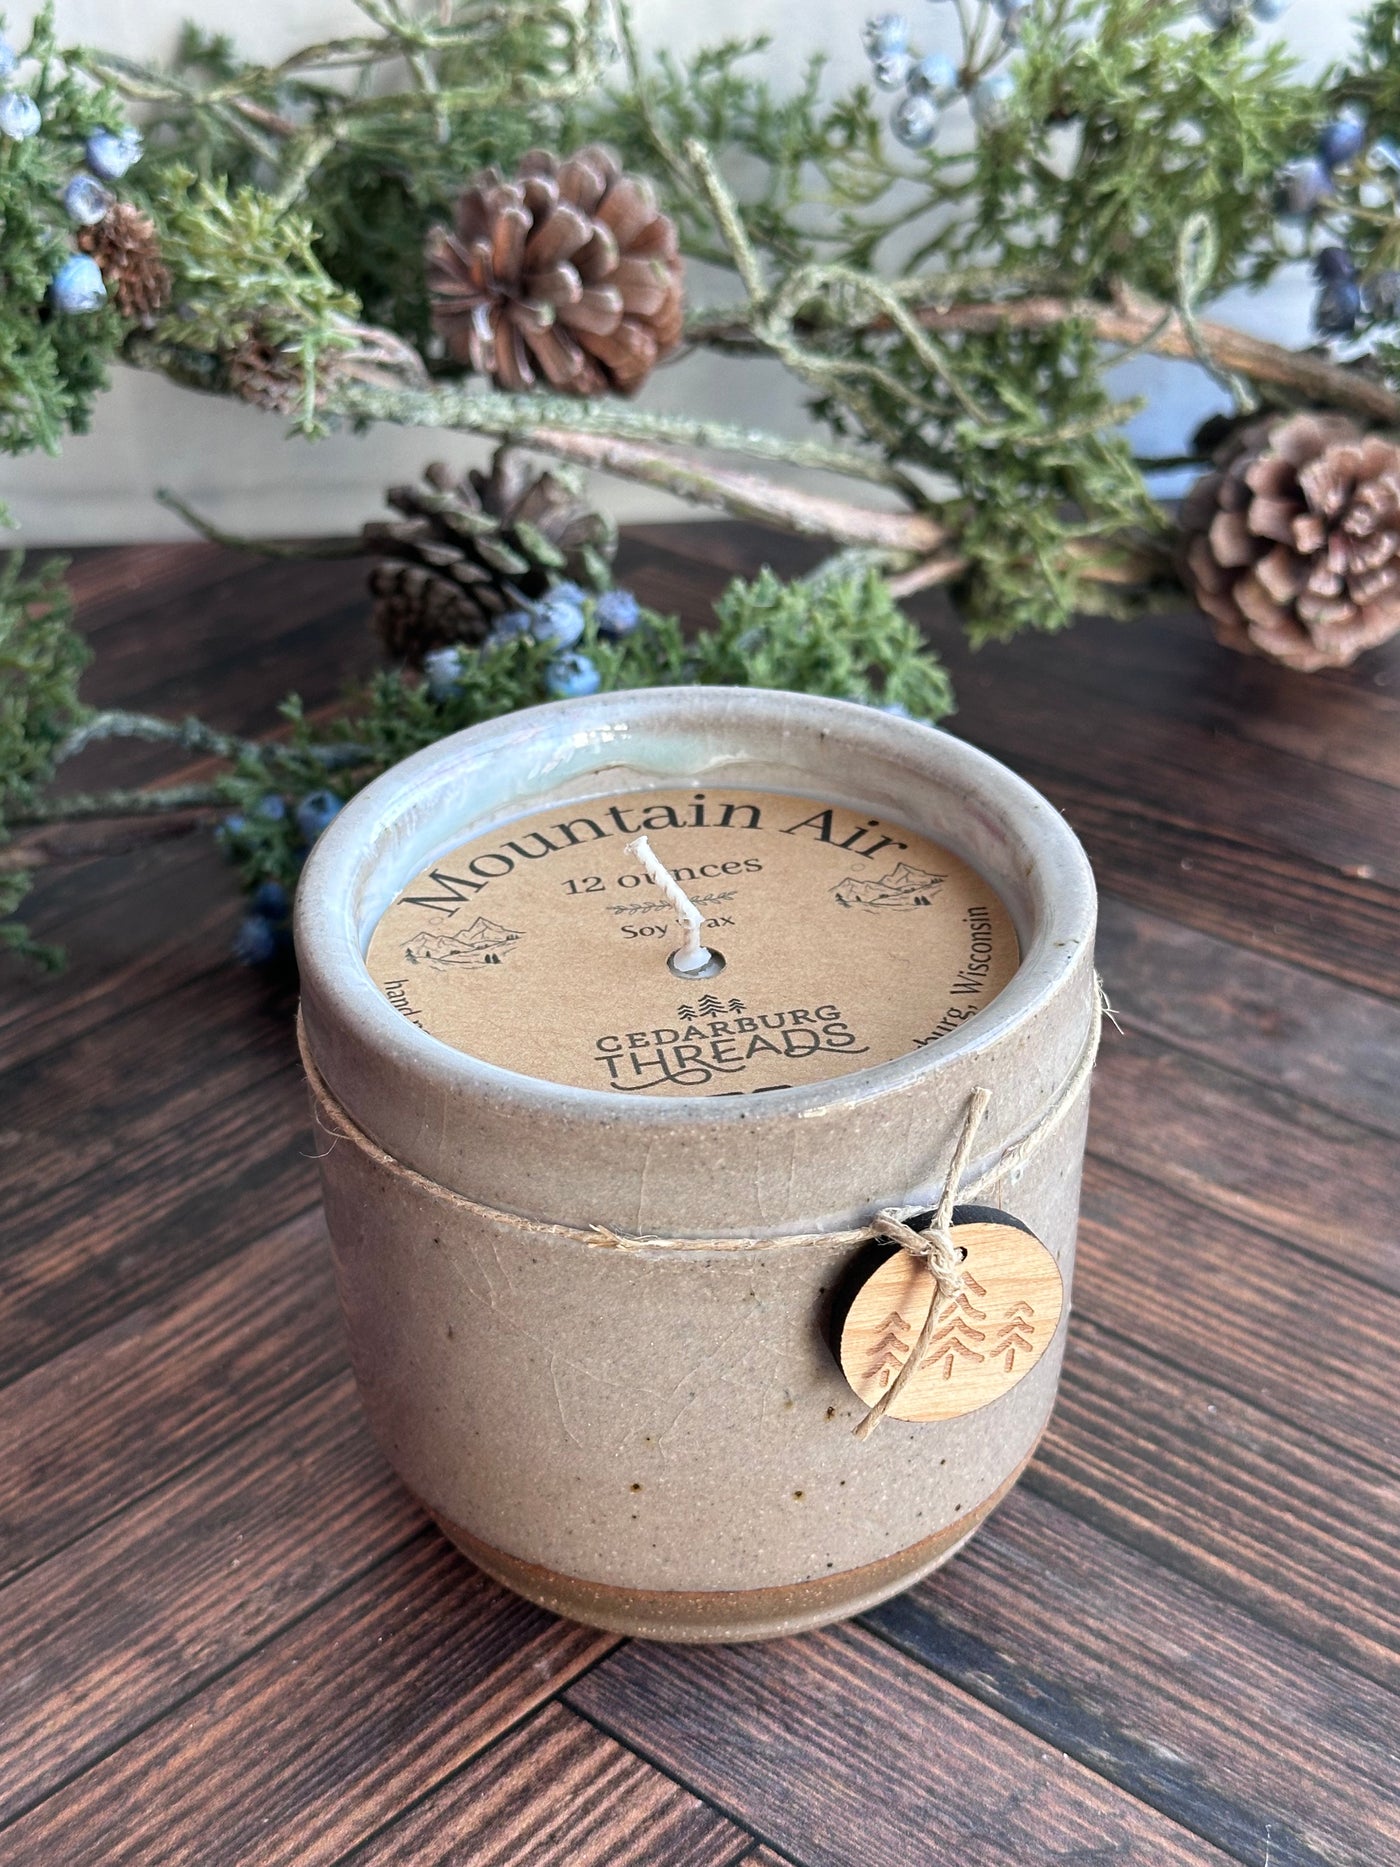 Grey 12 ounce ceramic vessel with mountain air soy candle